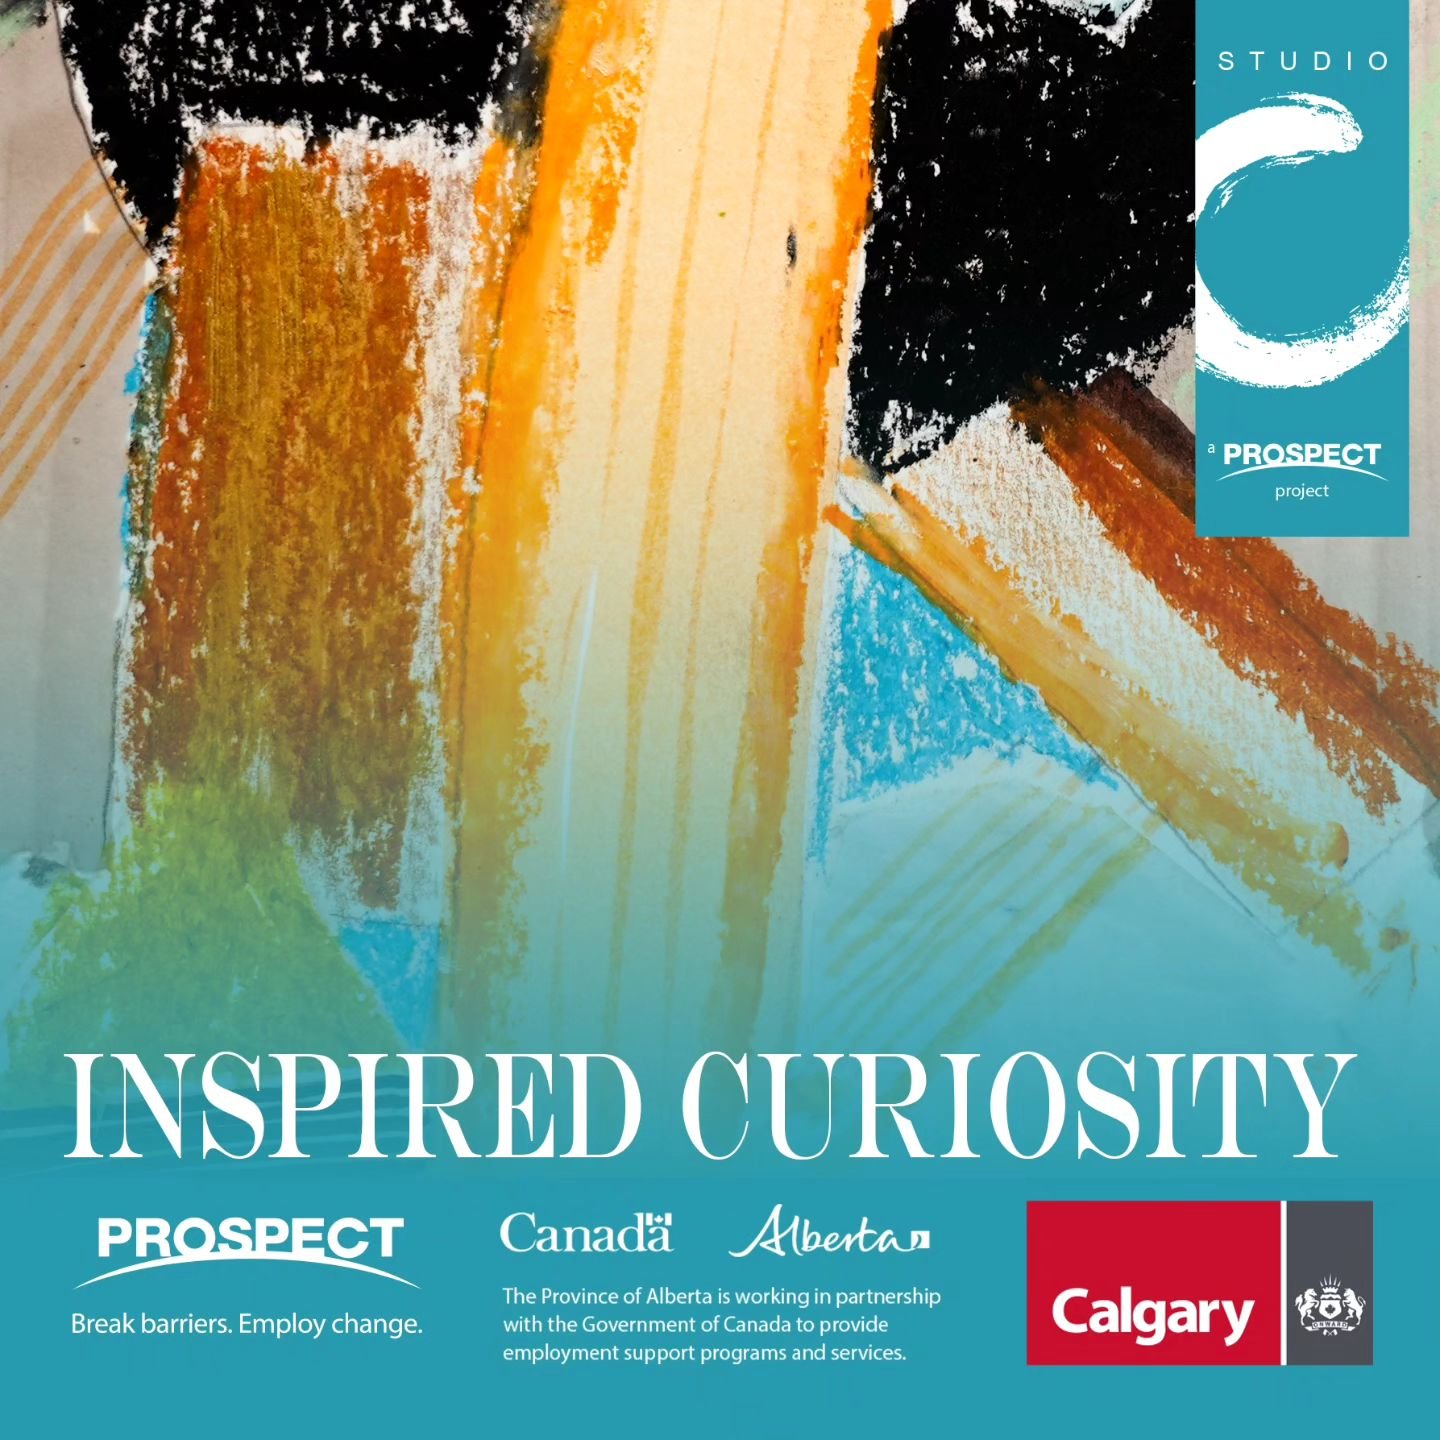 Inspired Curiosity showcases sensational work created by participants in the ArtRecruits program. ArtRecruits is an art-based workplace skill building program that teaches employment skills in the art studio rather than a classroom. The reception wil